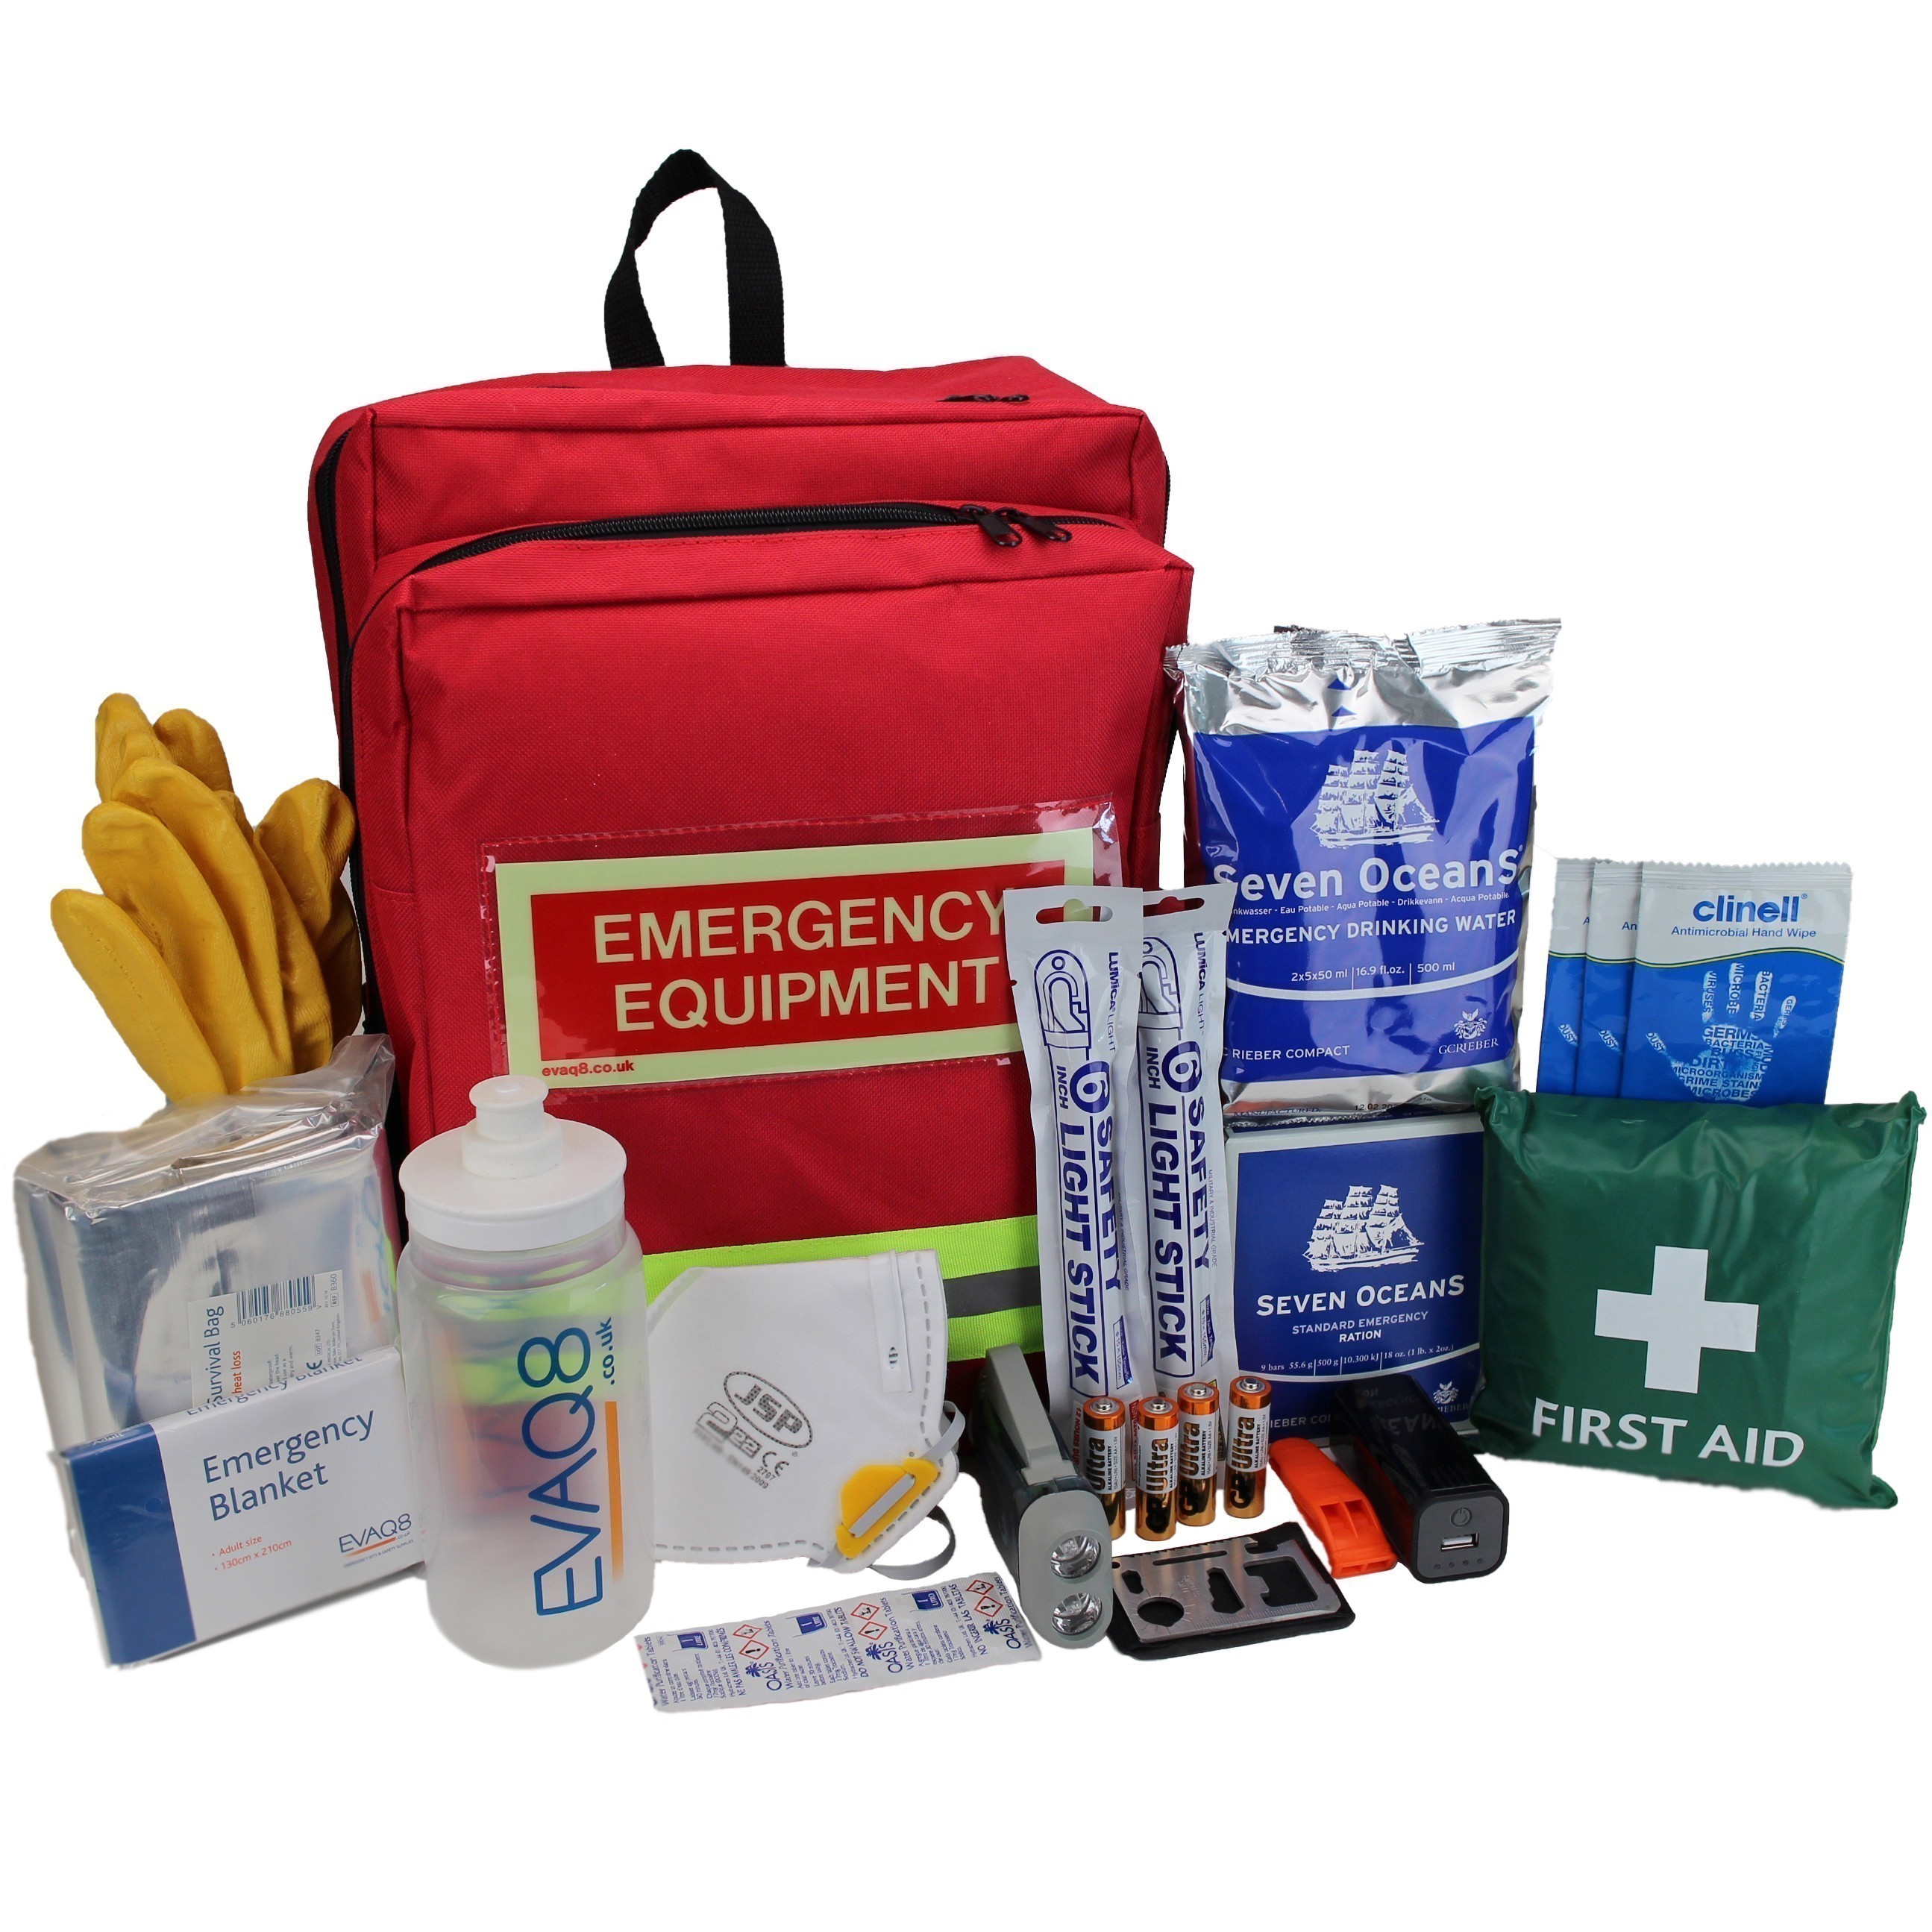 Emergency Kit List - How To Build Your Own Go Bag and Emergency